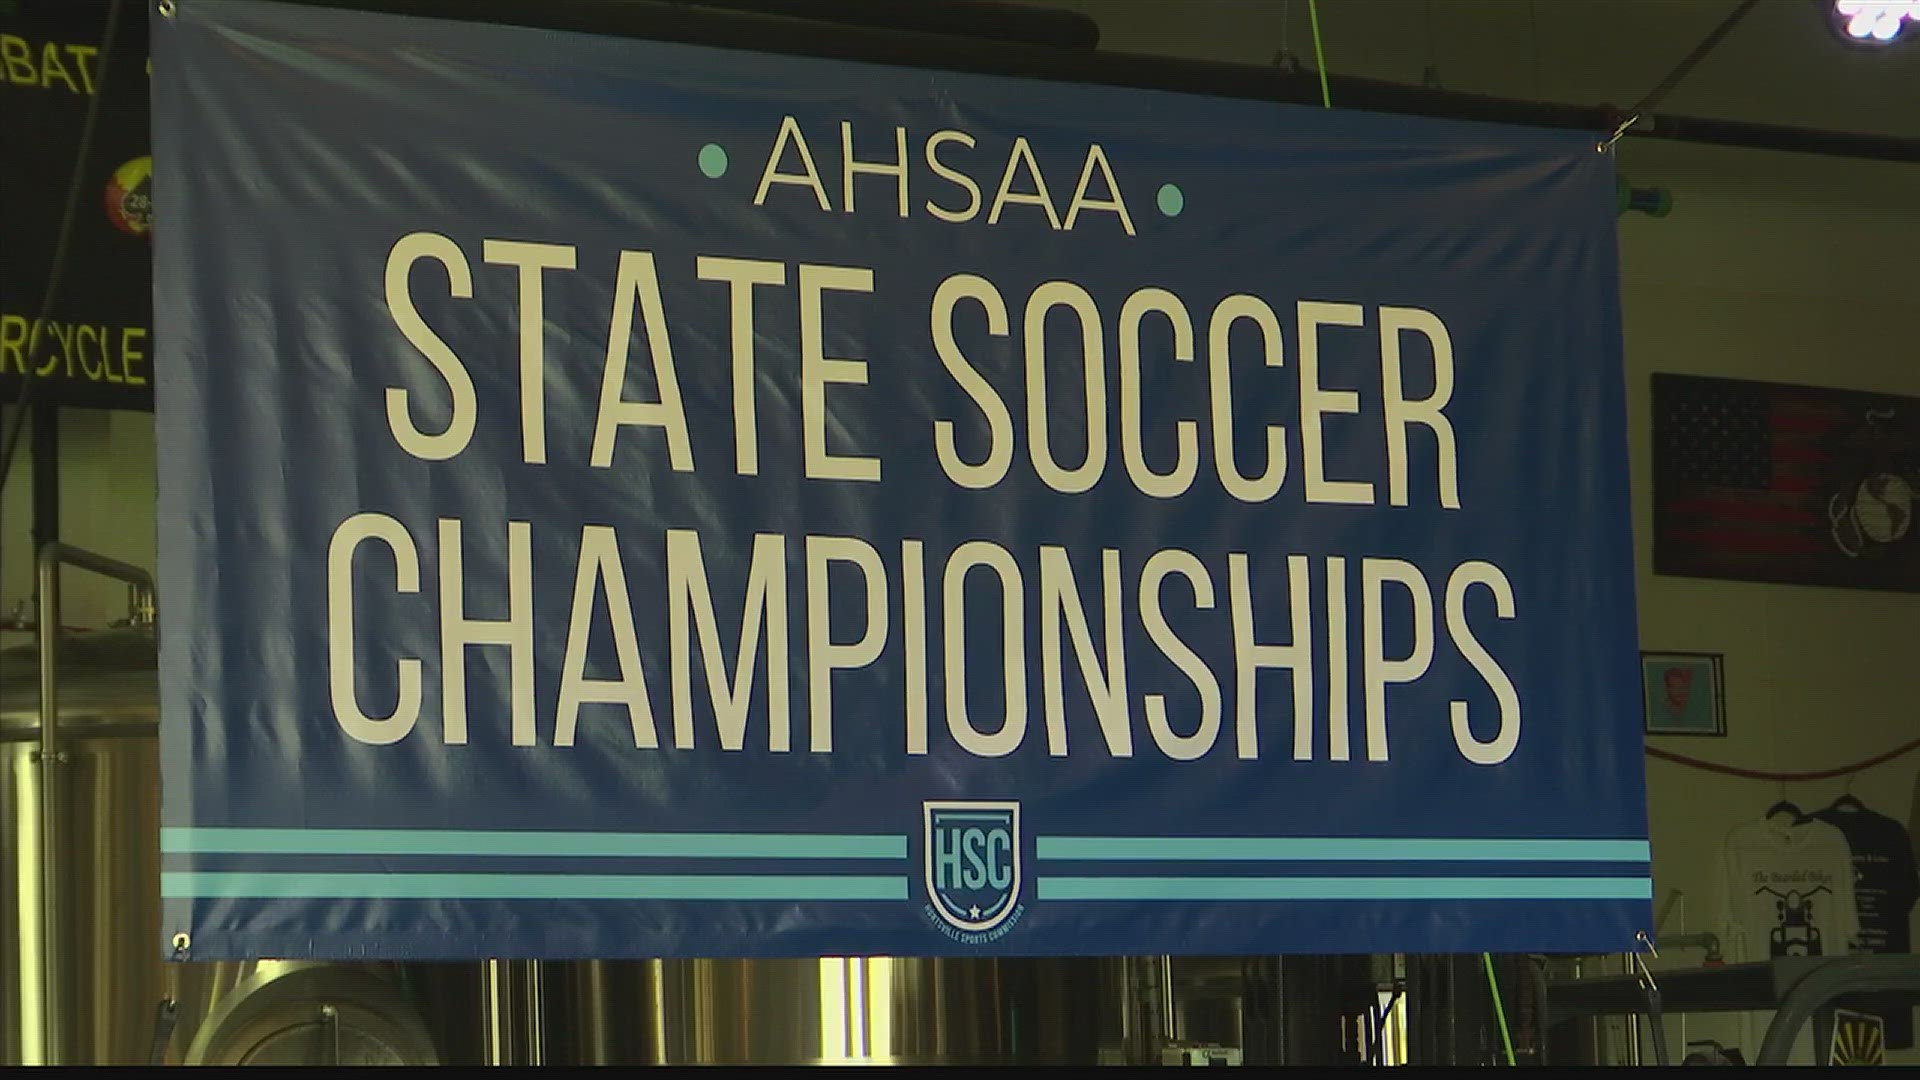 The tournament will take place at the John Hunt Park Soccer Fields May 11-13. 2023 marks the 22nd year the AHSAA State Soccer Championships will be held